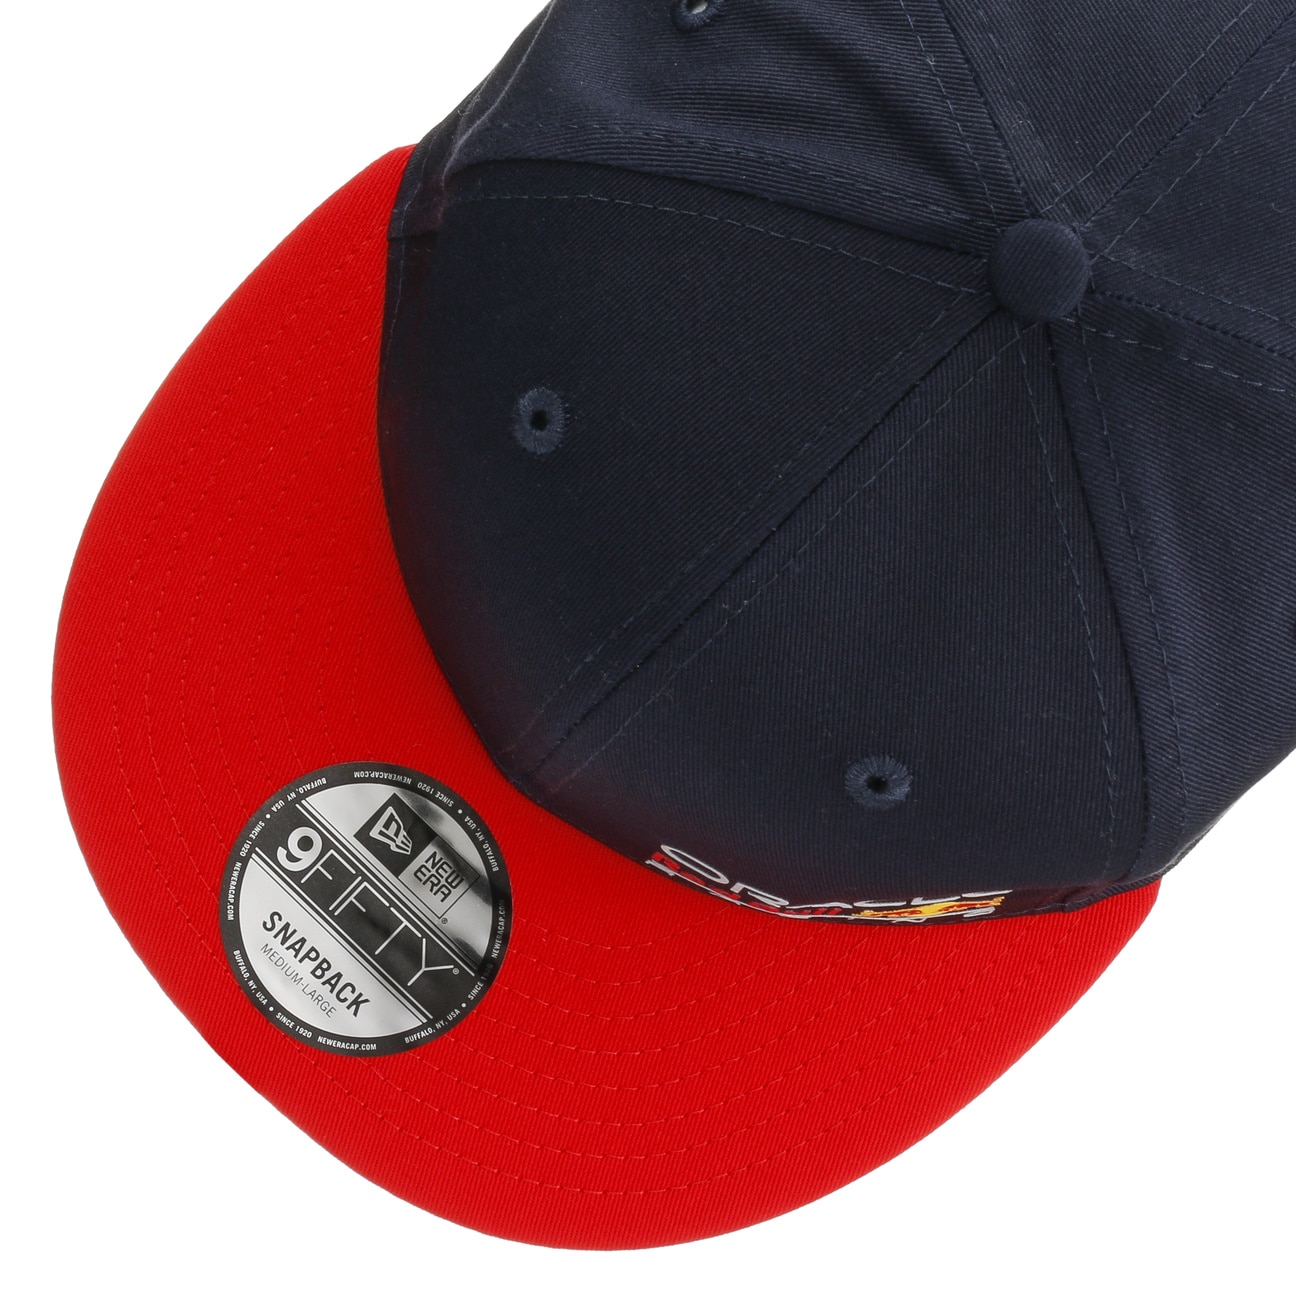 Casquette 9Fifty Essential Red Bull F1 by New Era